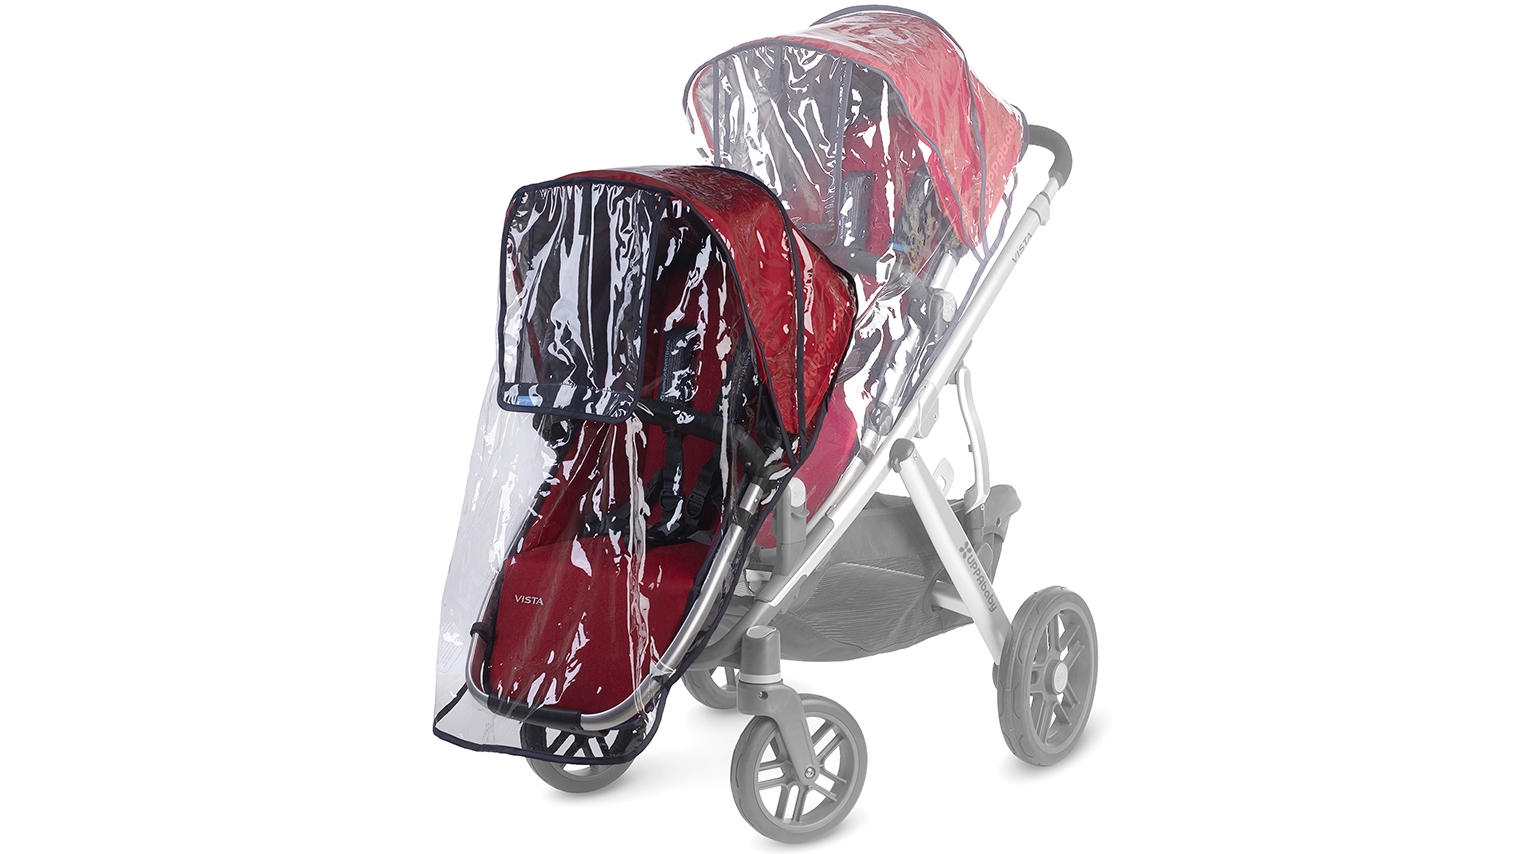 uppababy rumble seat recall